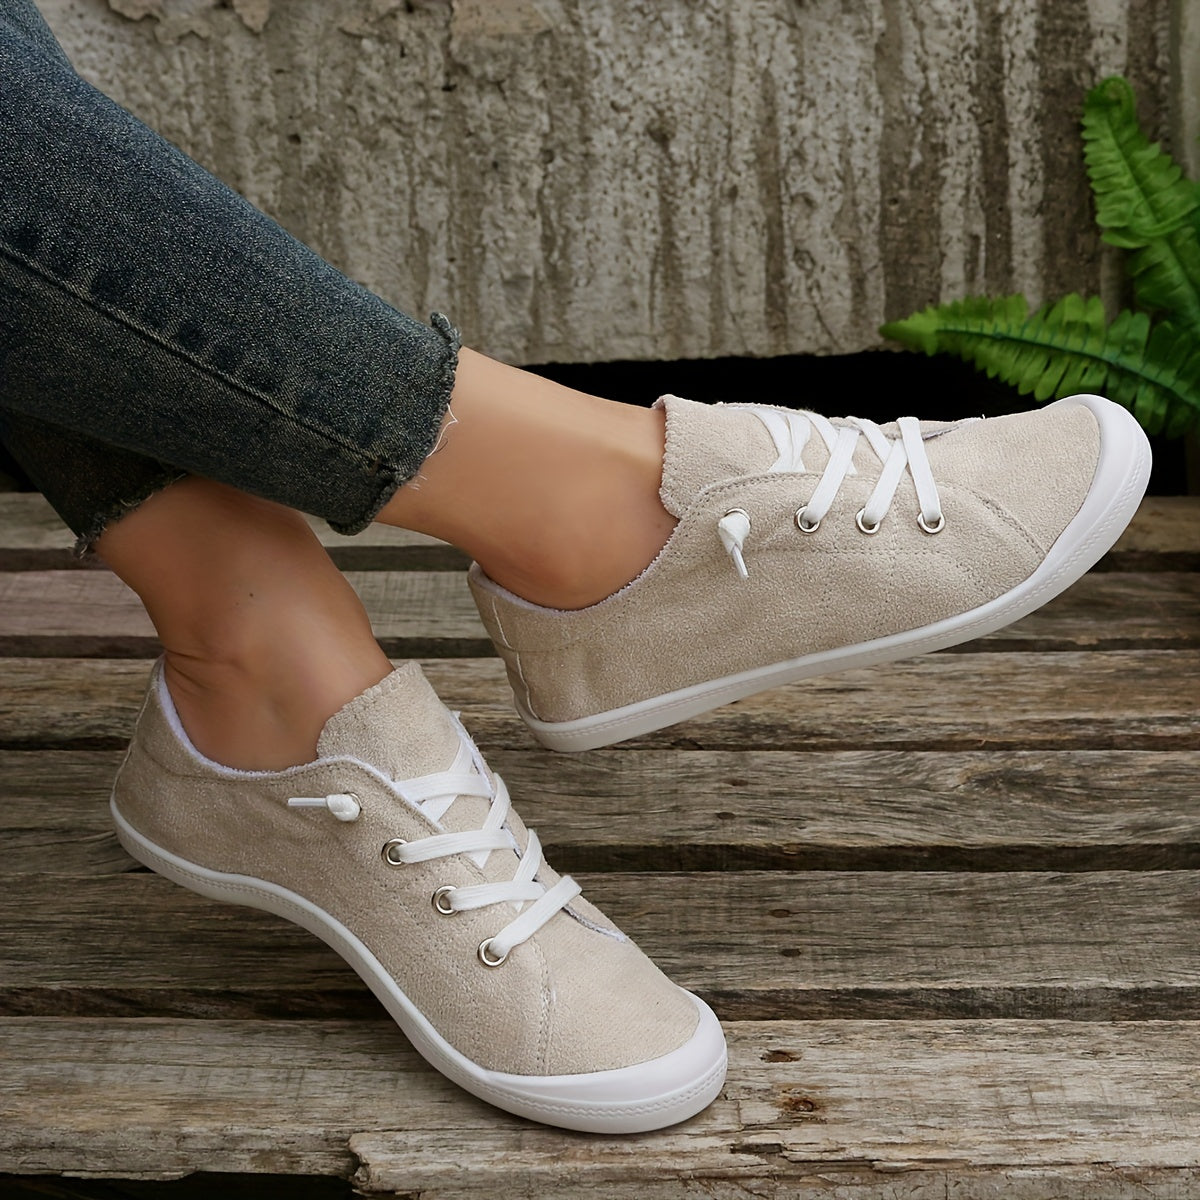 Women's Solid Color Flat Canvas Shoes, Casual & Lightweight  Lace Up Sneakers, Women's All-Match Outdoor Shoes